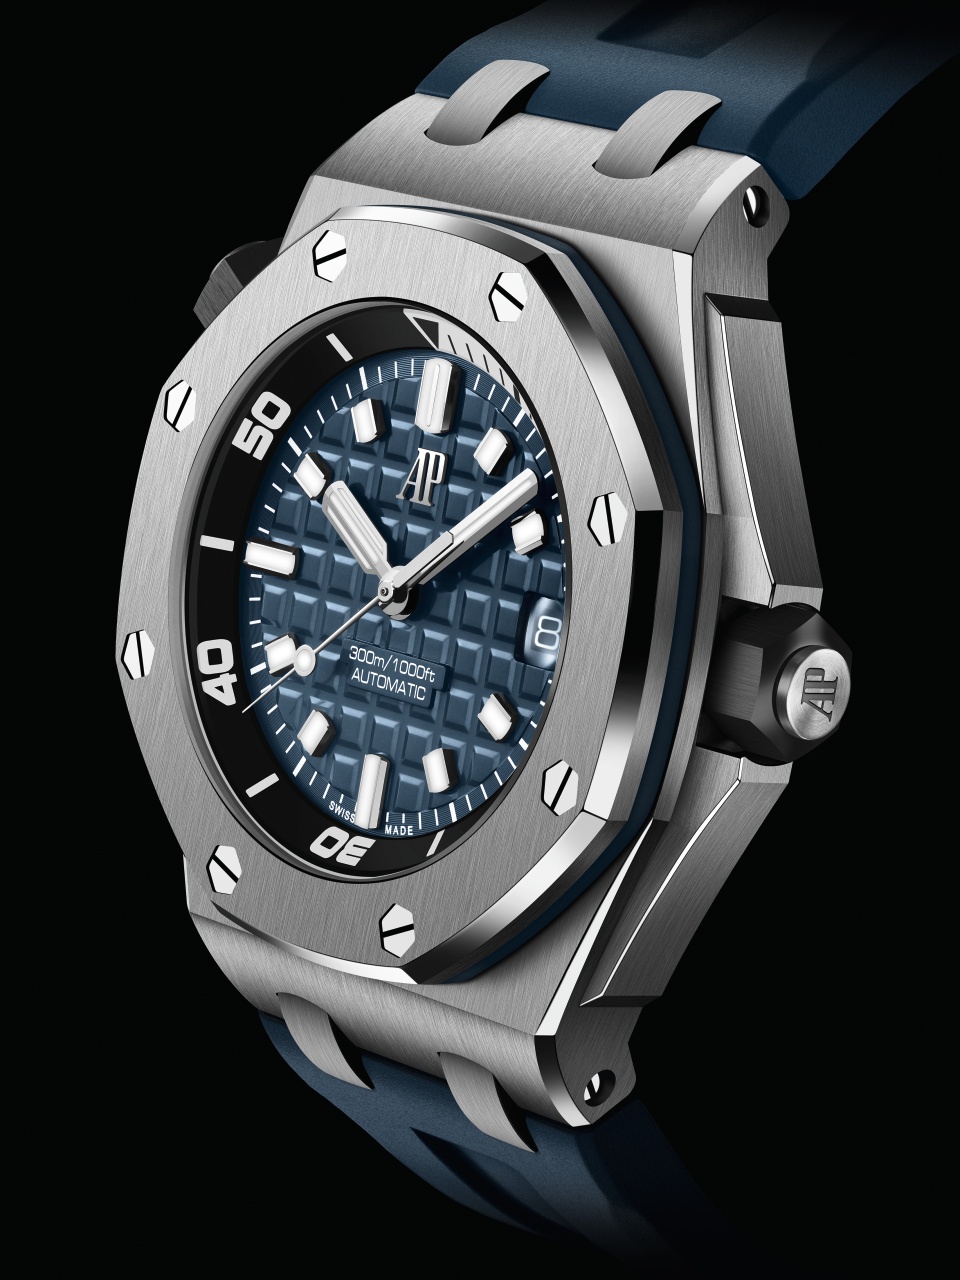 Audemars Piguet Royal Oak Offshore Diver- 42mm- Black Dial-... for  Rs.1,938,748 for sale from a Trusted Seller on Chrono24